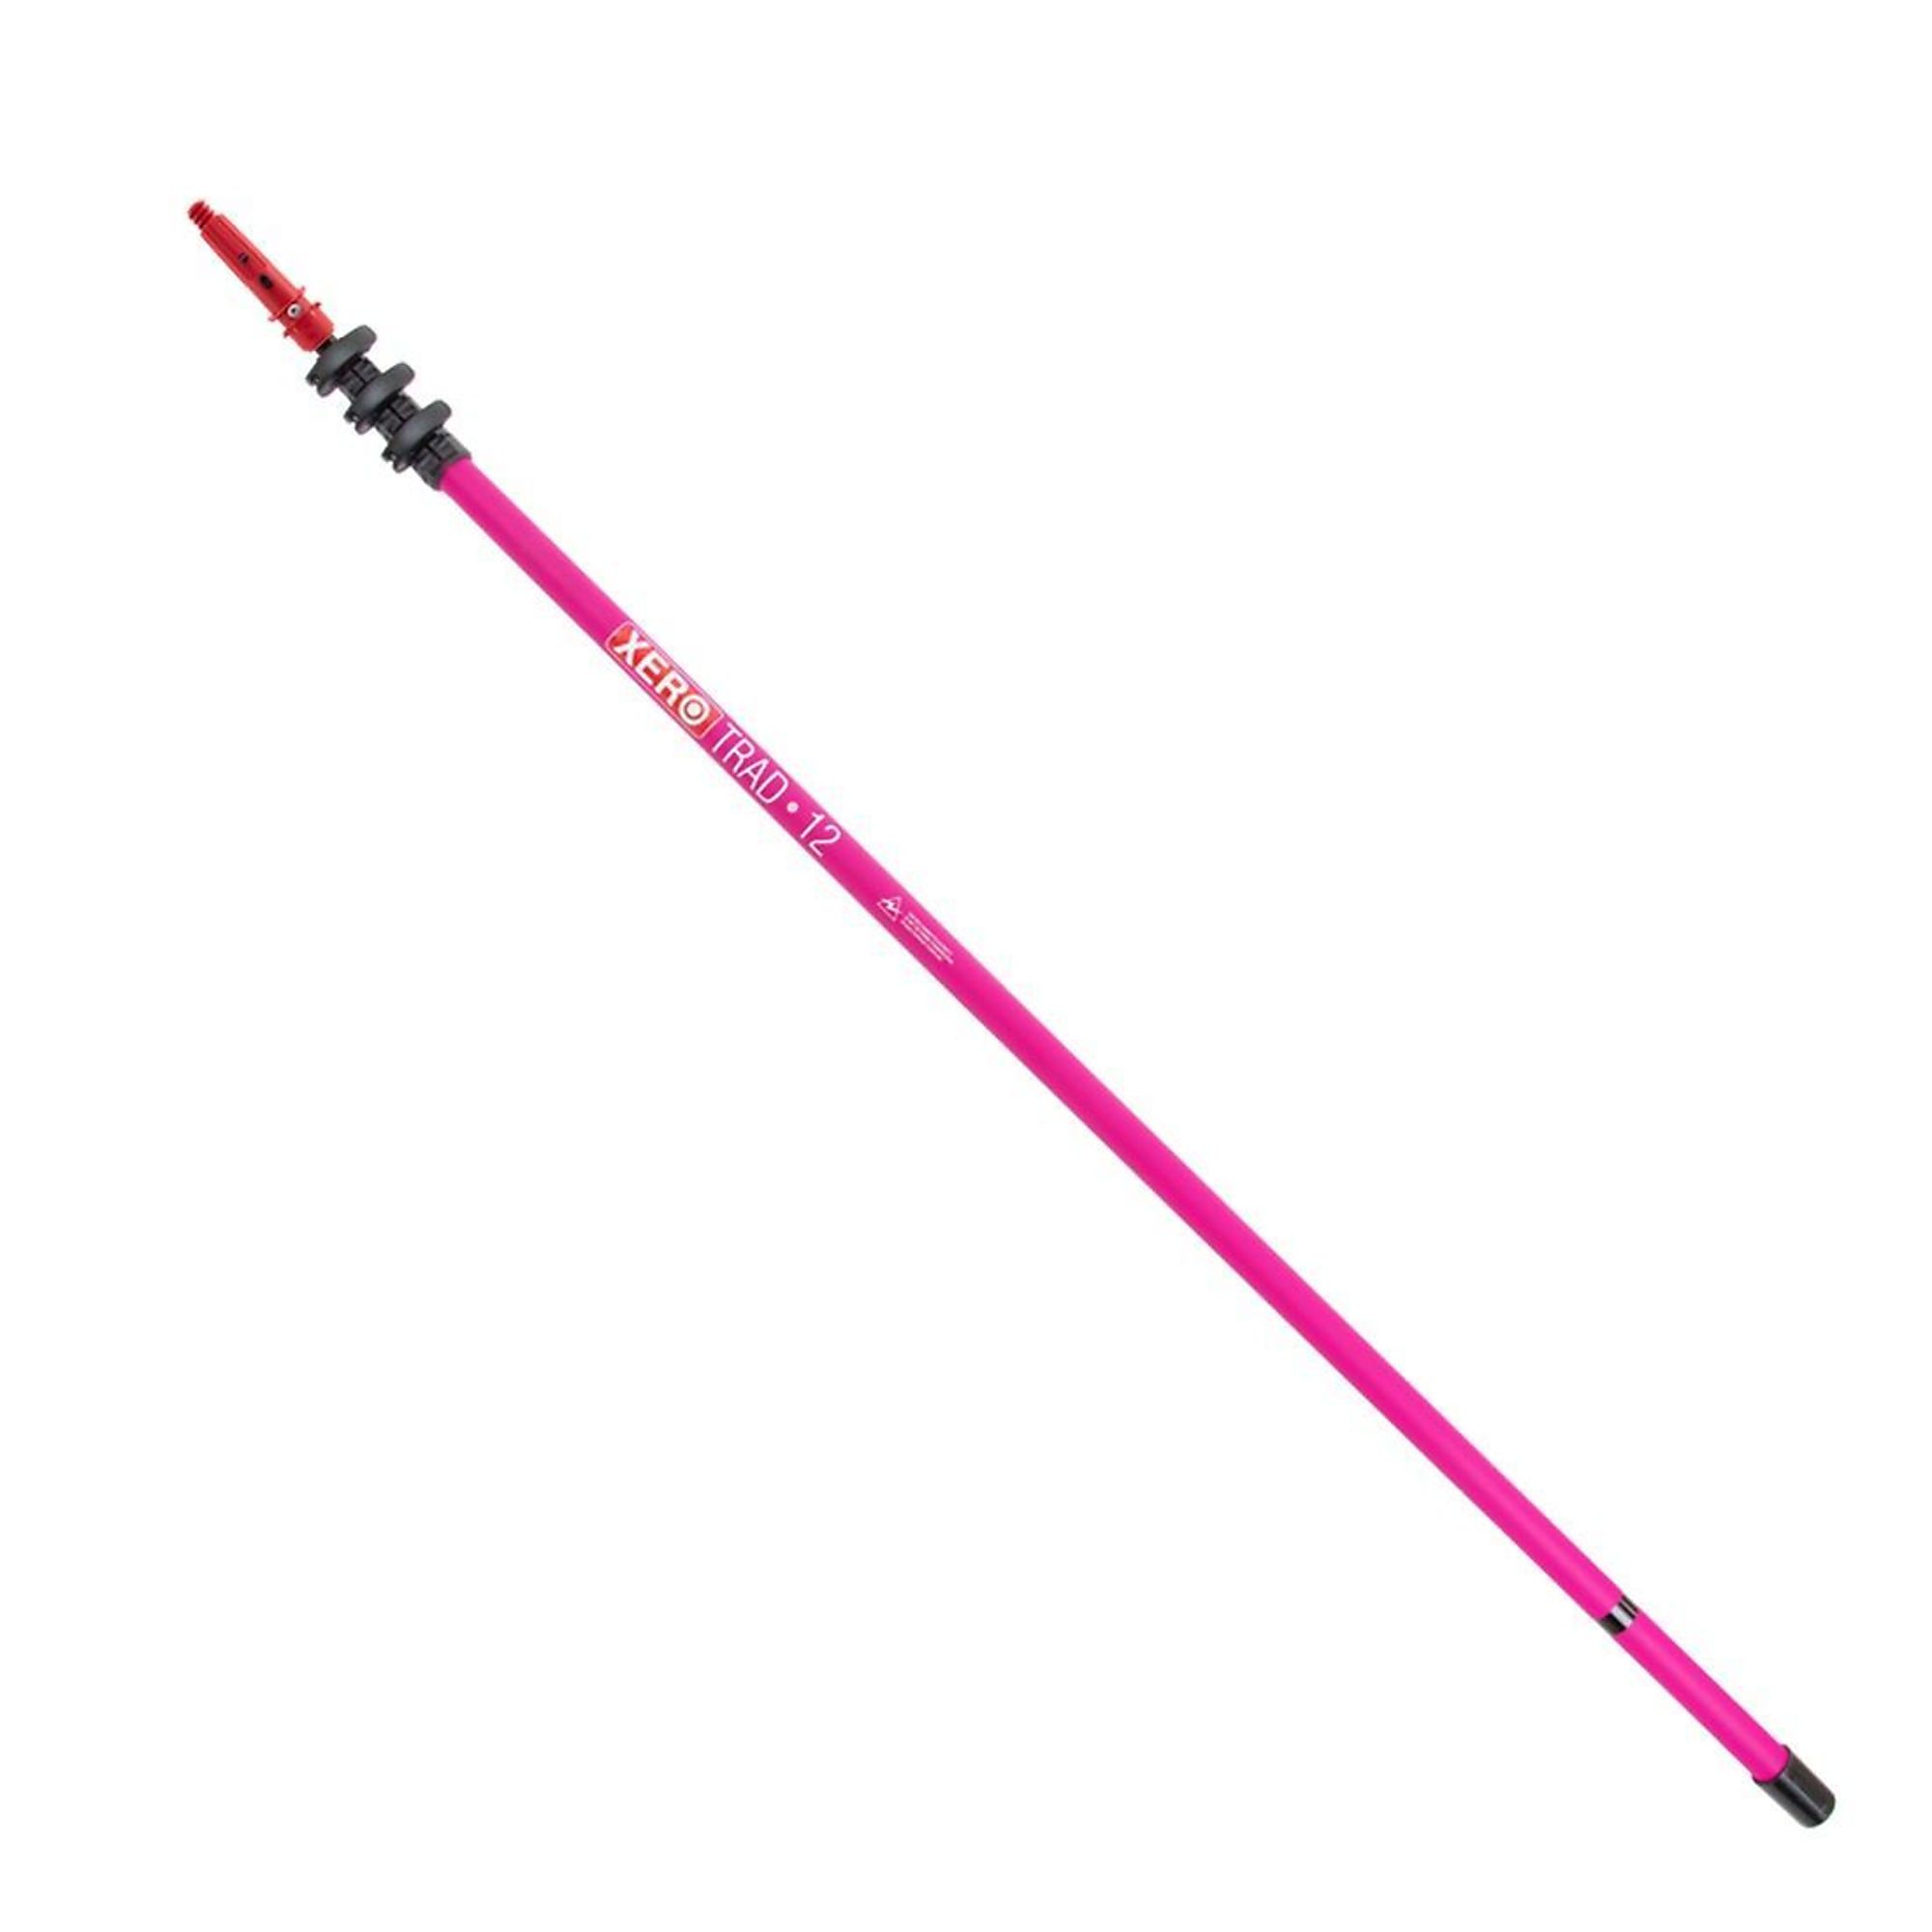 XERO, Trad Pole 2.0 Unger Tip - Hot Pink 12ft., Model 209-20-418